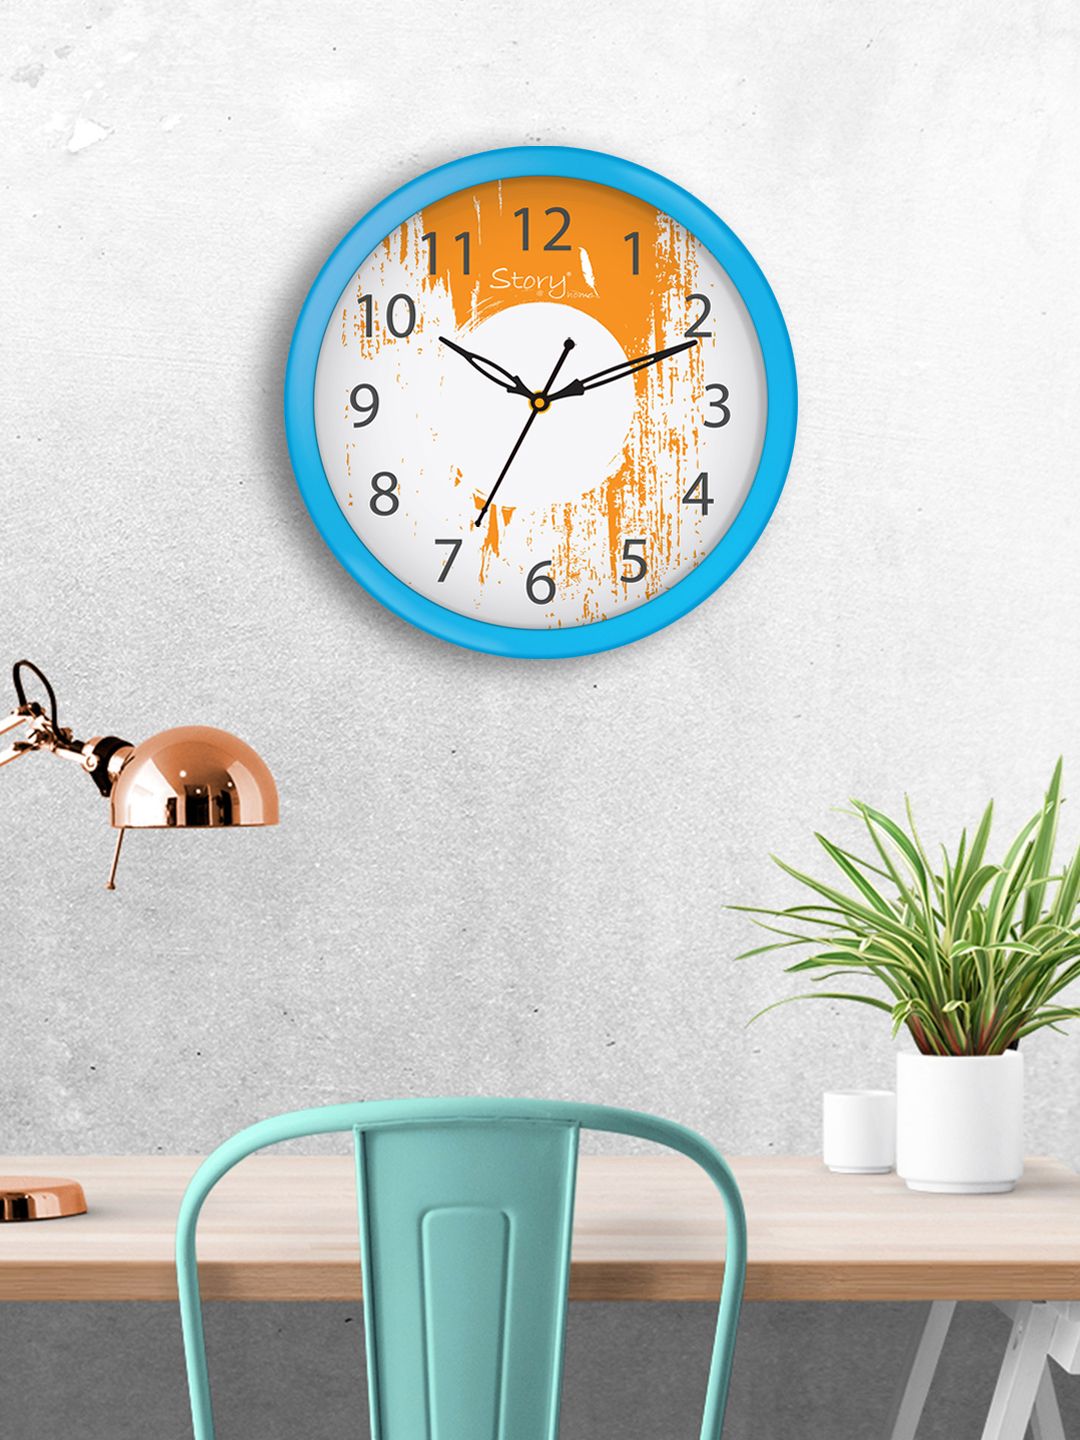 Story@home White Round Printed Analogue Wall Clock 25 cm x 25 cm Price in India